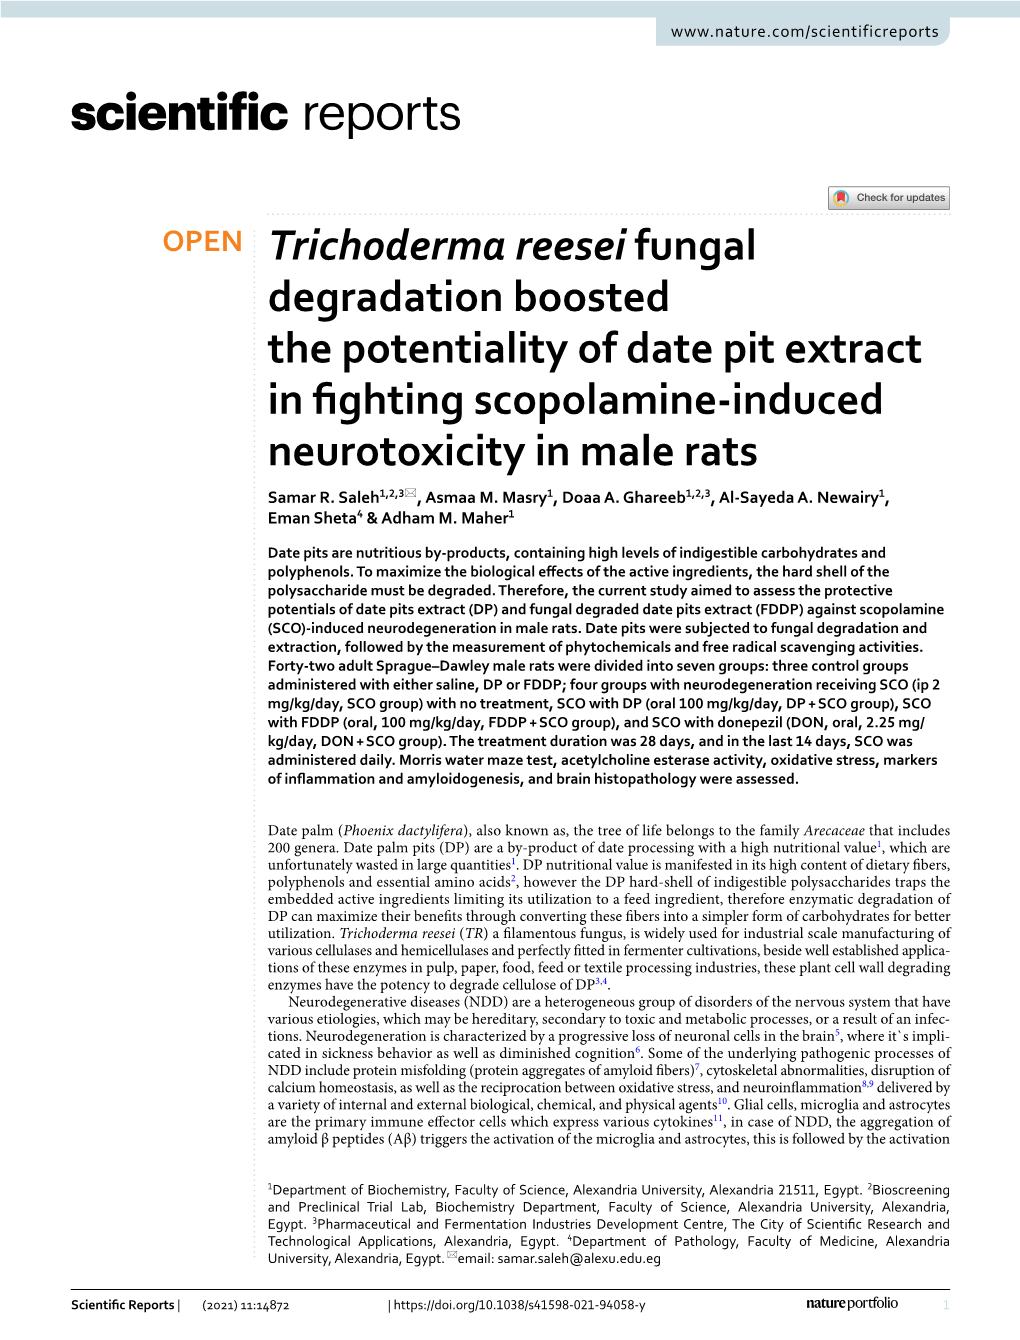 Trichoderma Reesei Fungal Degradation Boosted the Potentiality of Date Pit Extract in Fghting Scopolamine‑Induced Neurotoxicity in Male Rats Samar R